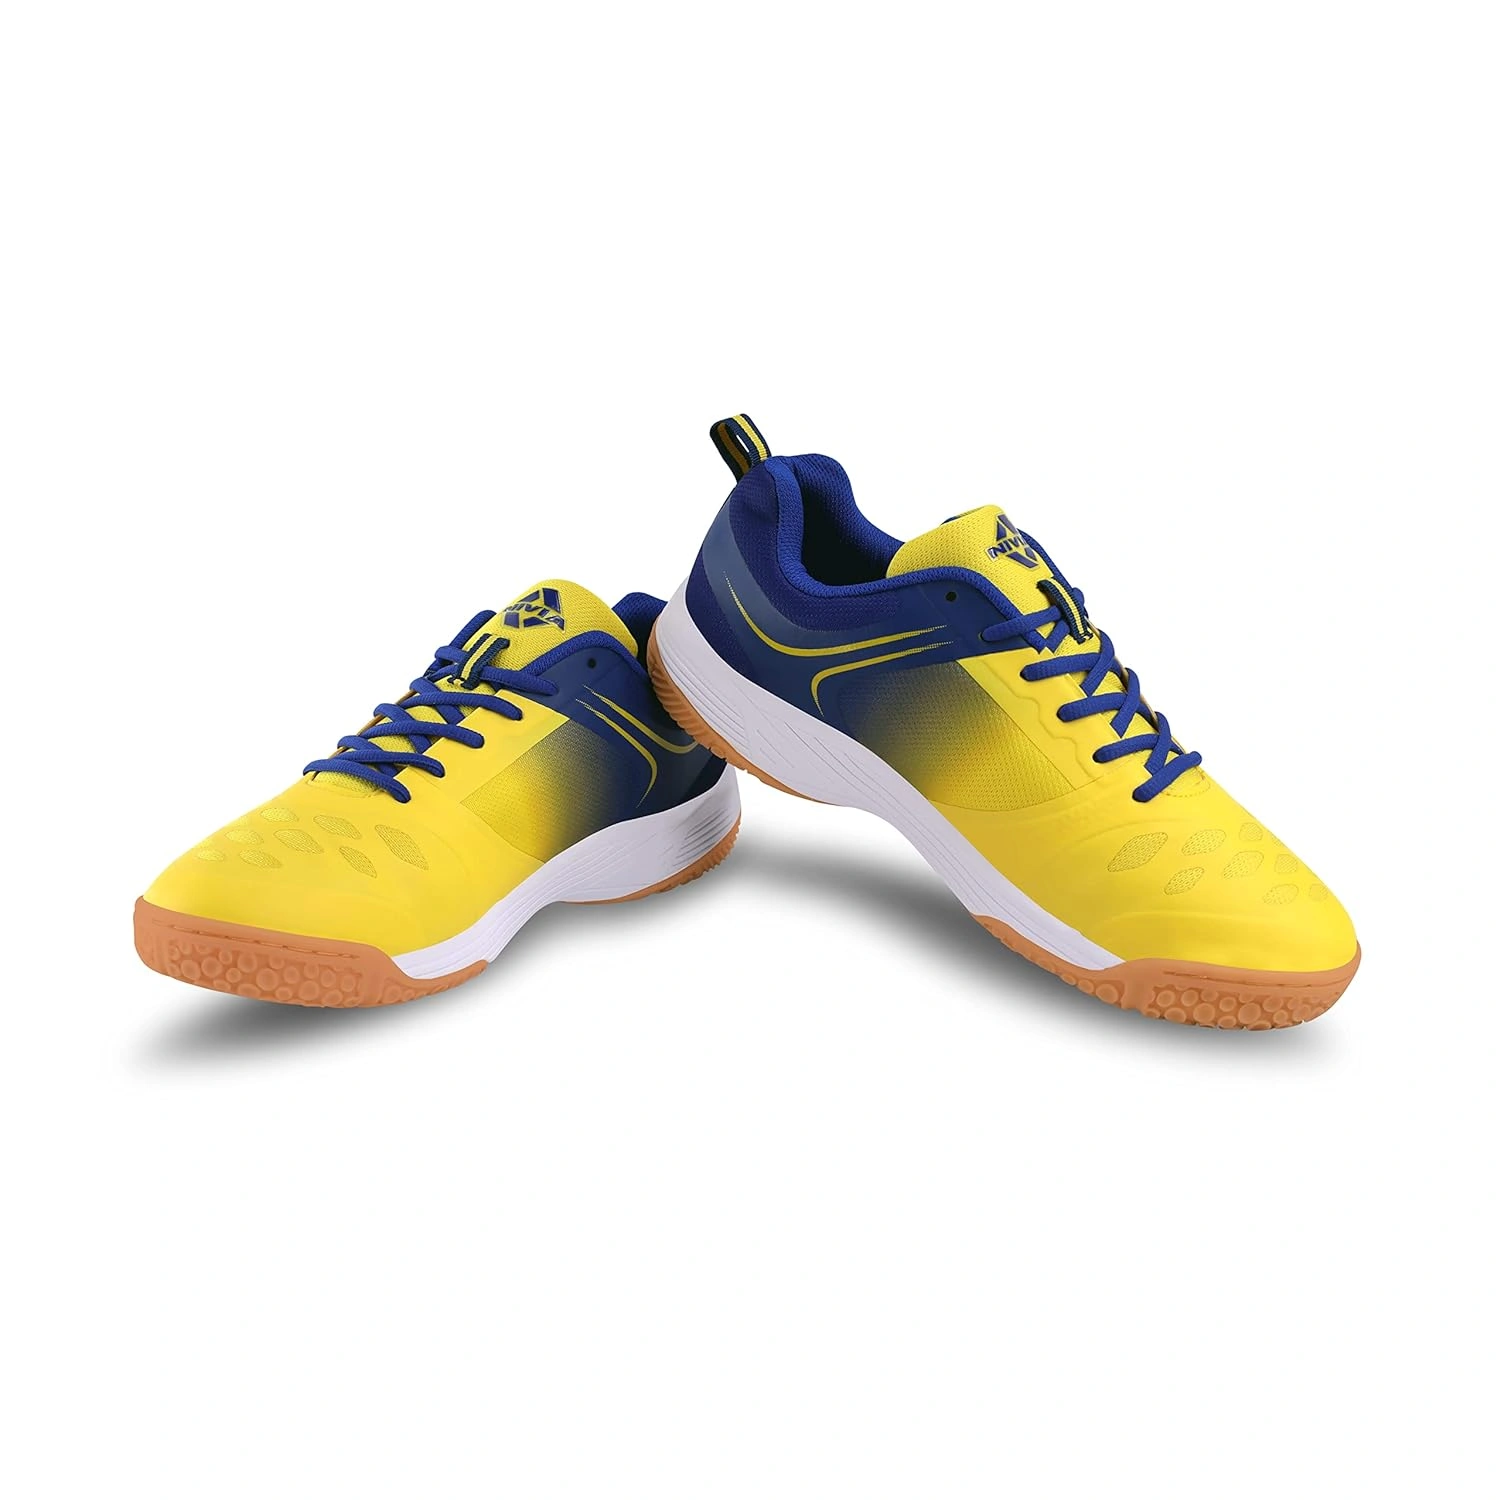 Nivia Hy-court 2.0 Badminton Shoes For Mens-YELL/ BLUE-3-5